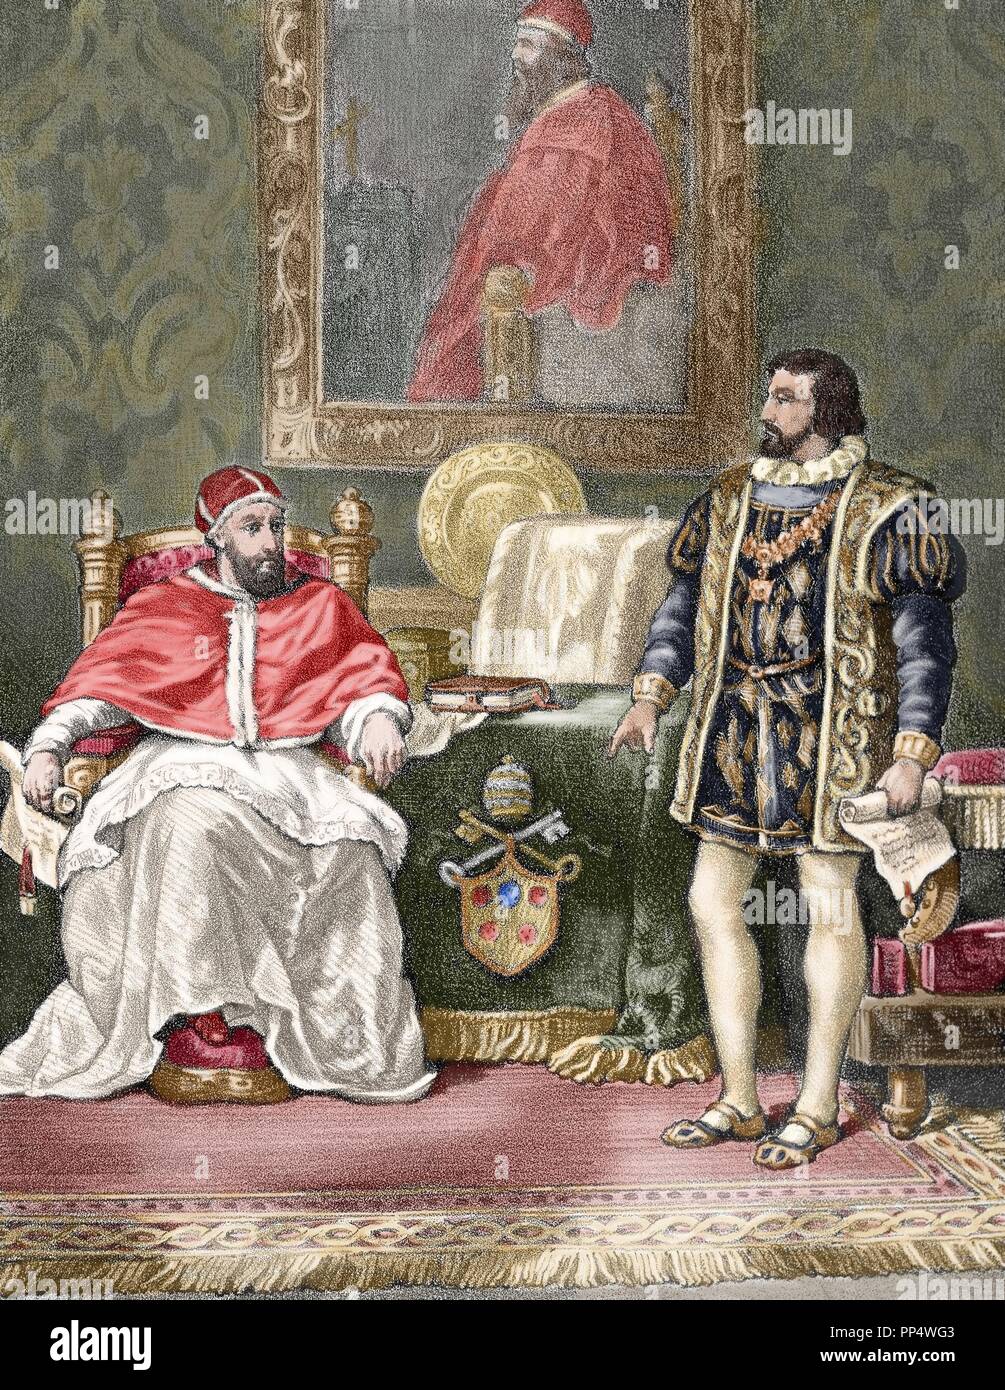 Clement VII (1478Ð1534), born Giulio di Giuliano de Medici, Pope from 1523 to 1534, with the king of France Francis I (1494-1547). Colored engraving. Stock Photo